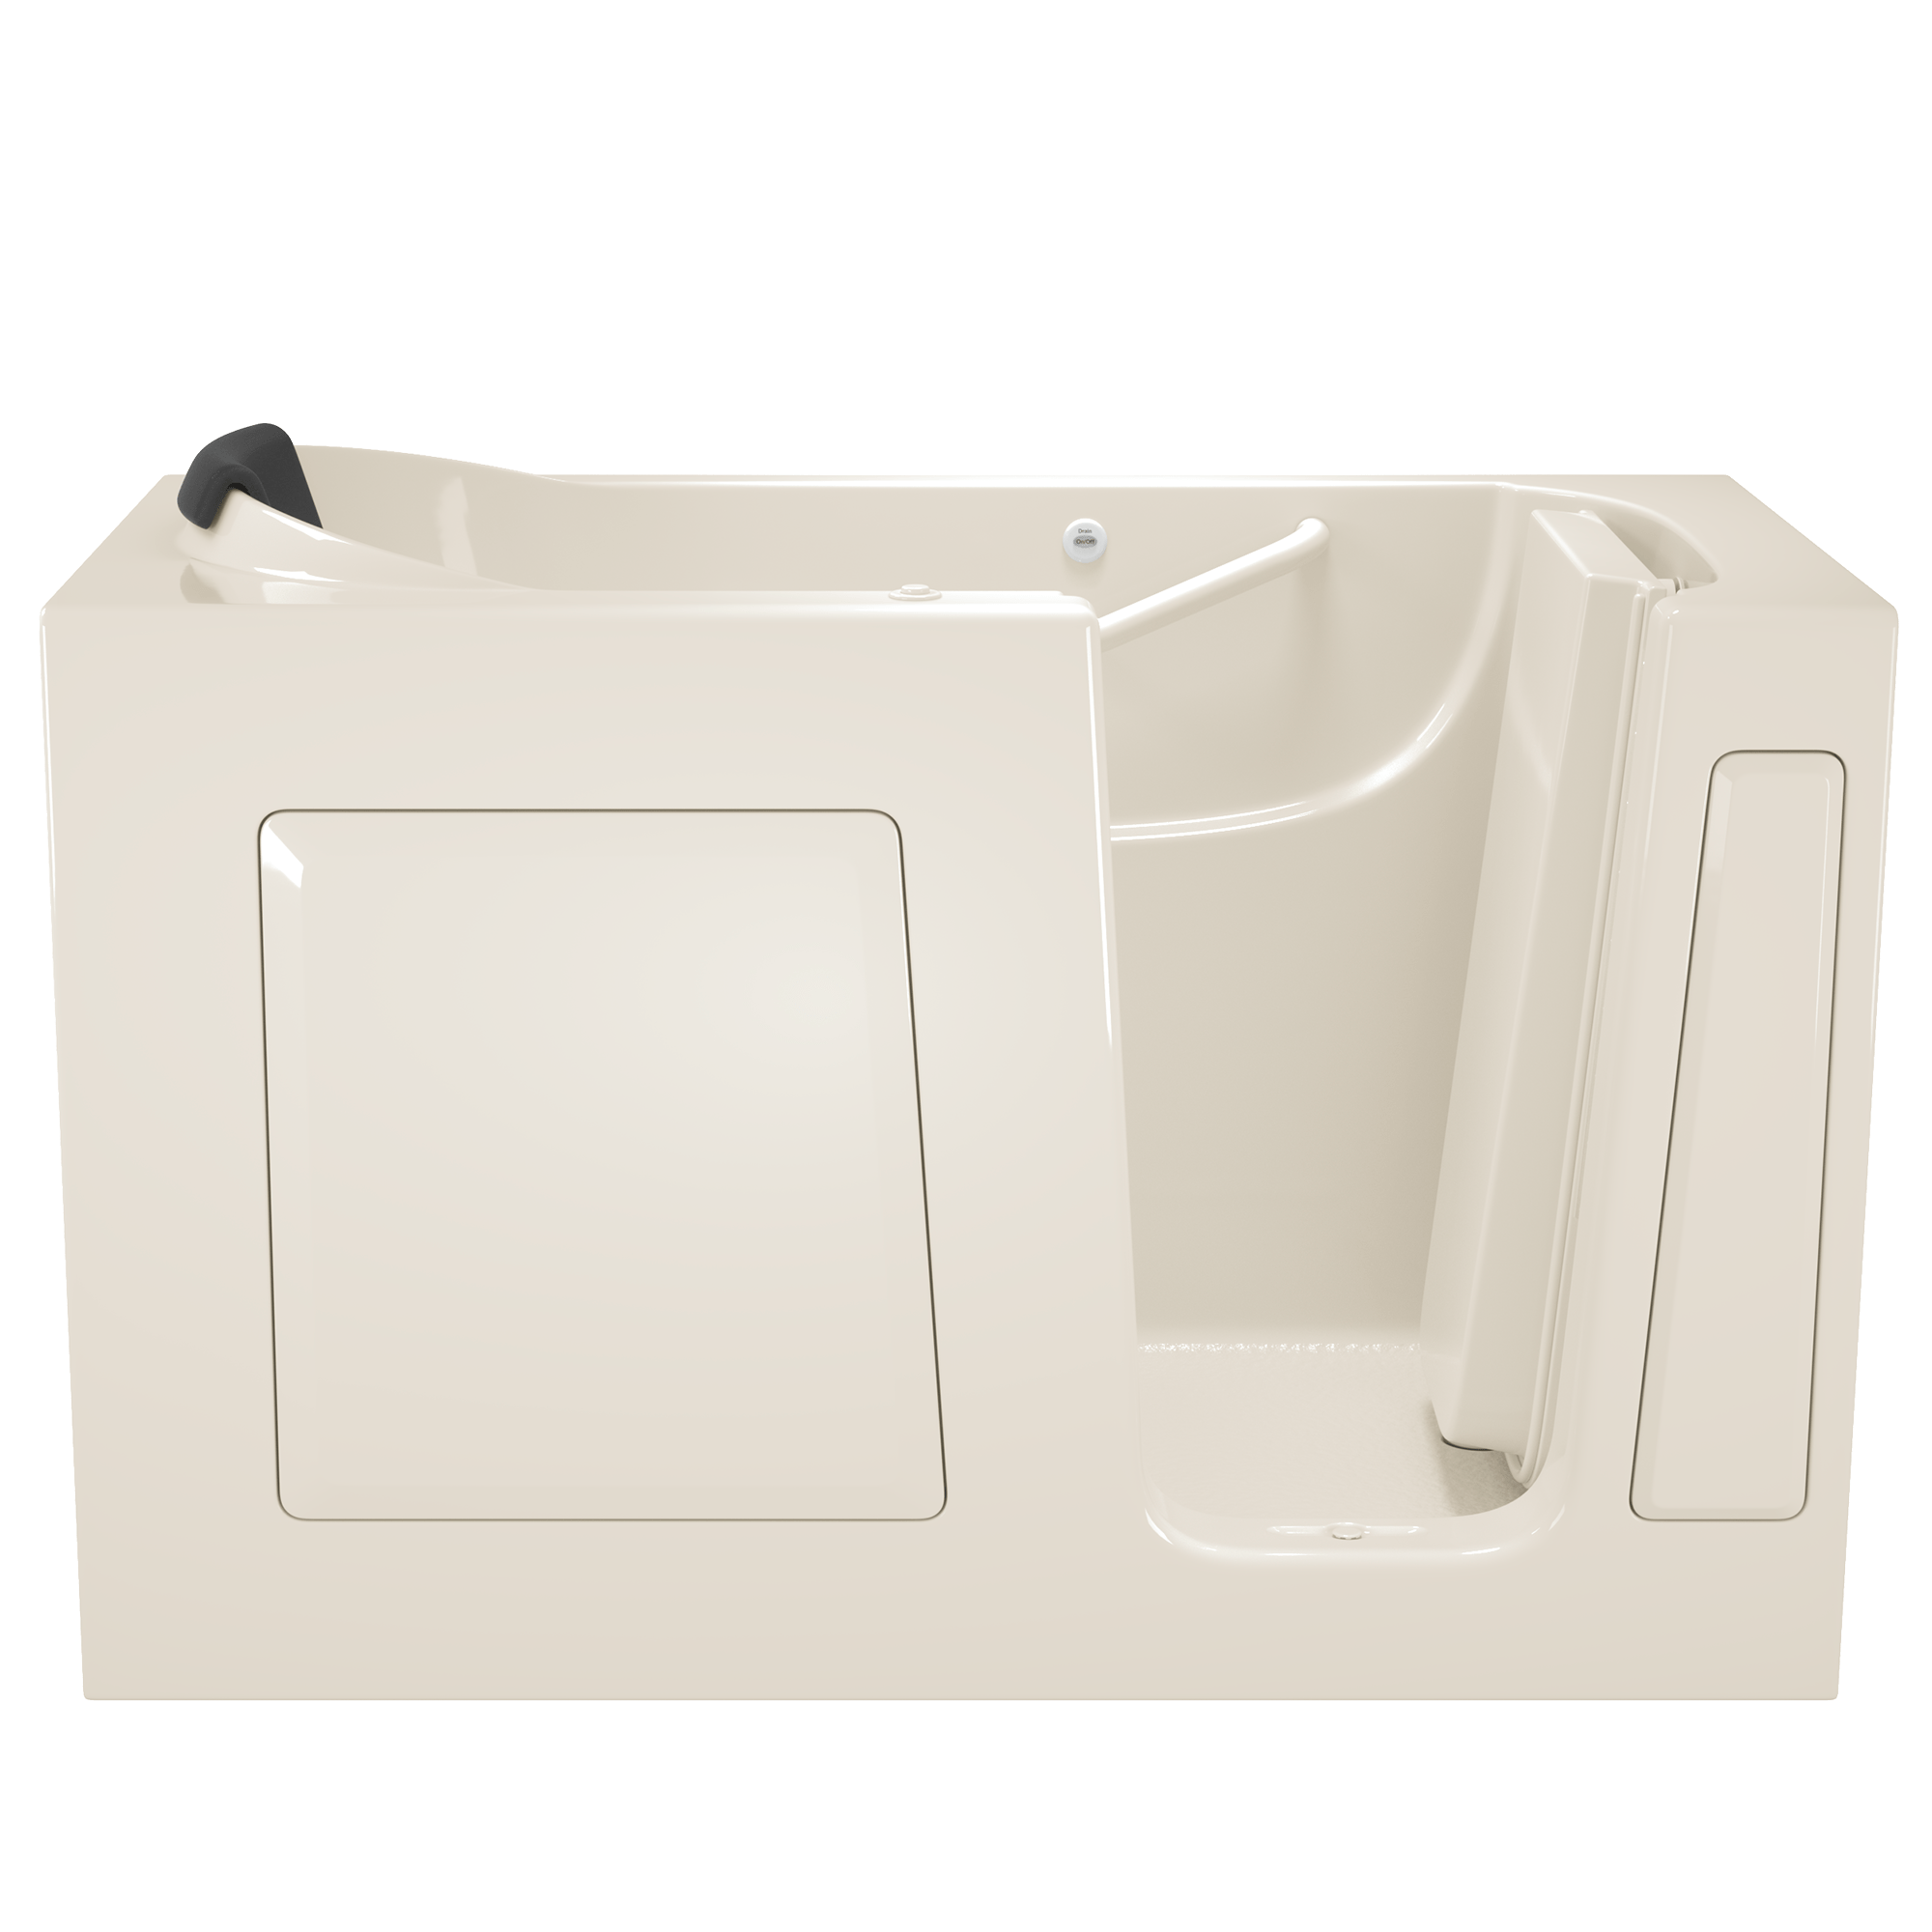 Gelcoat Premium Series 30 x 60 -Inch Walk-in Tub With Whirlpool System - Right-Hand Drain